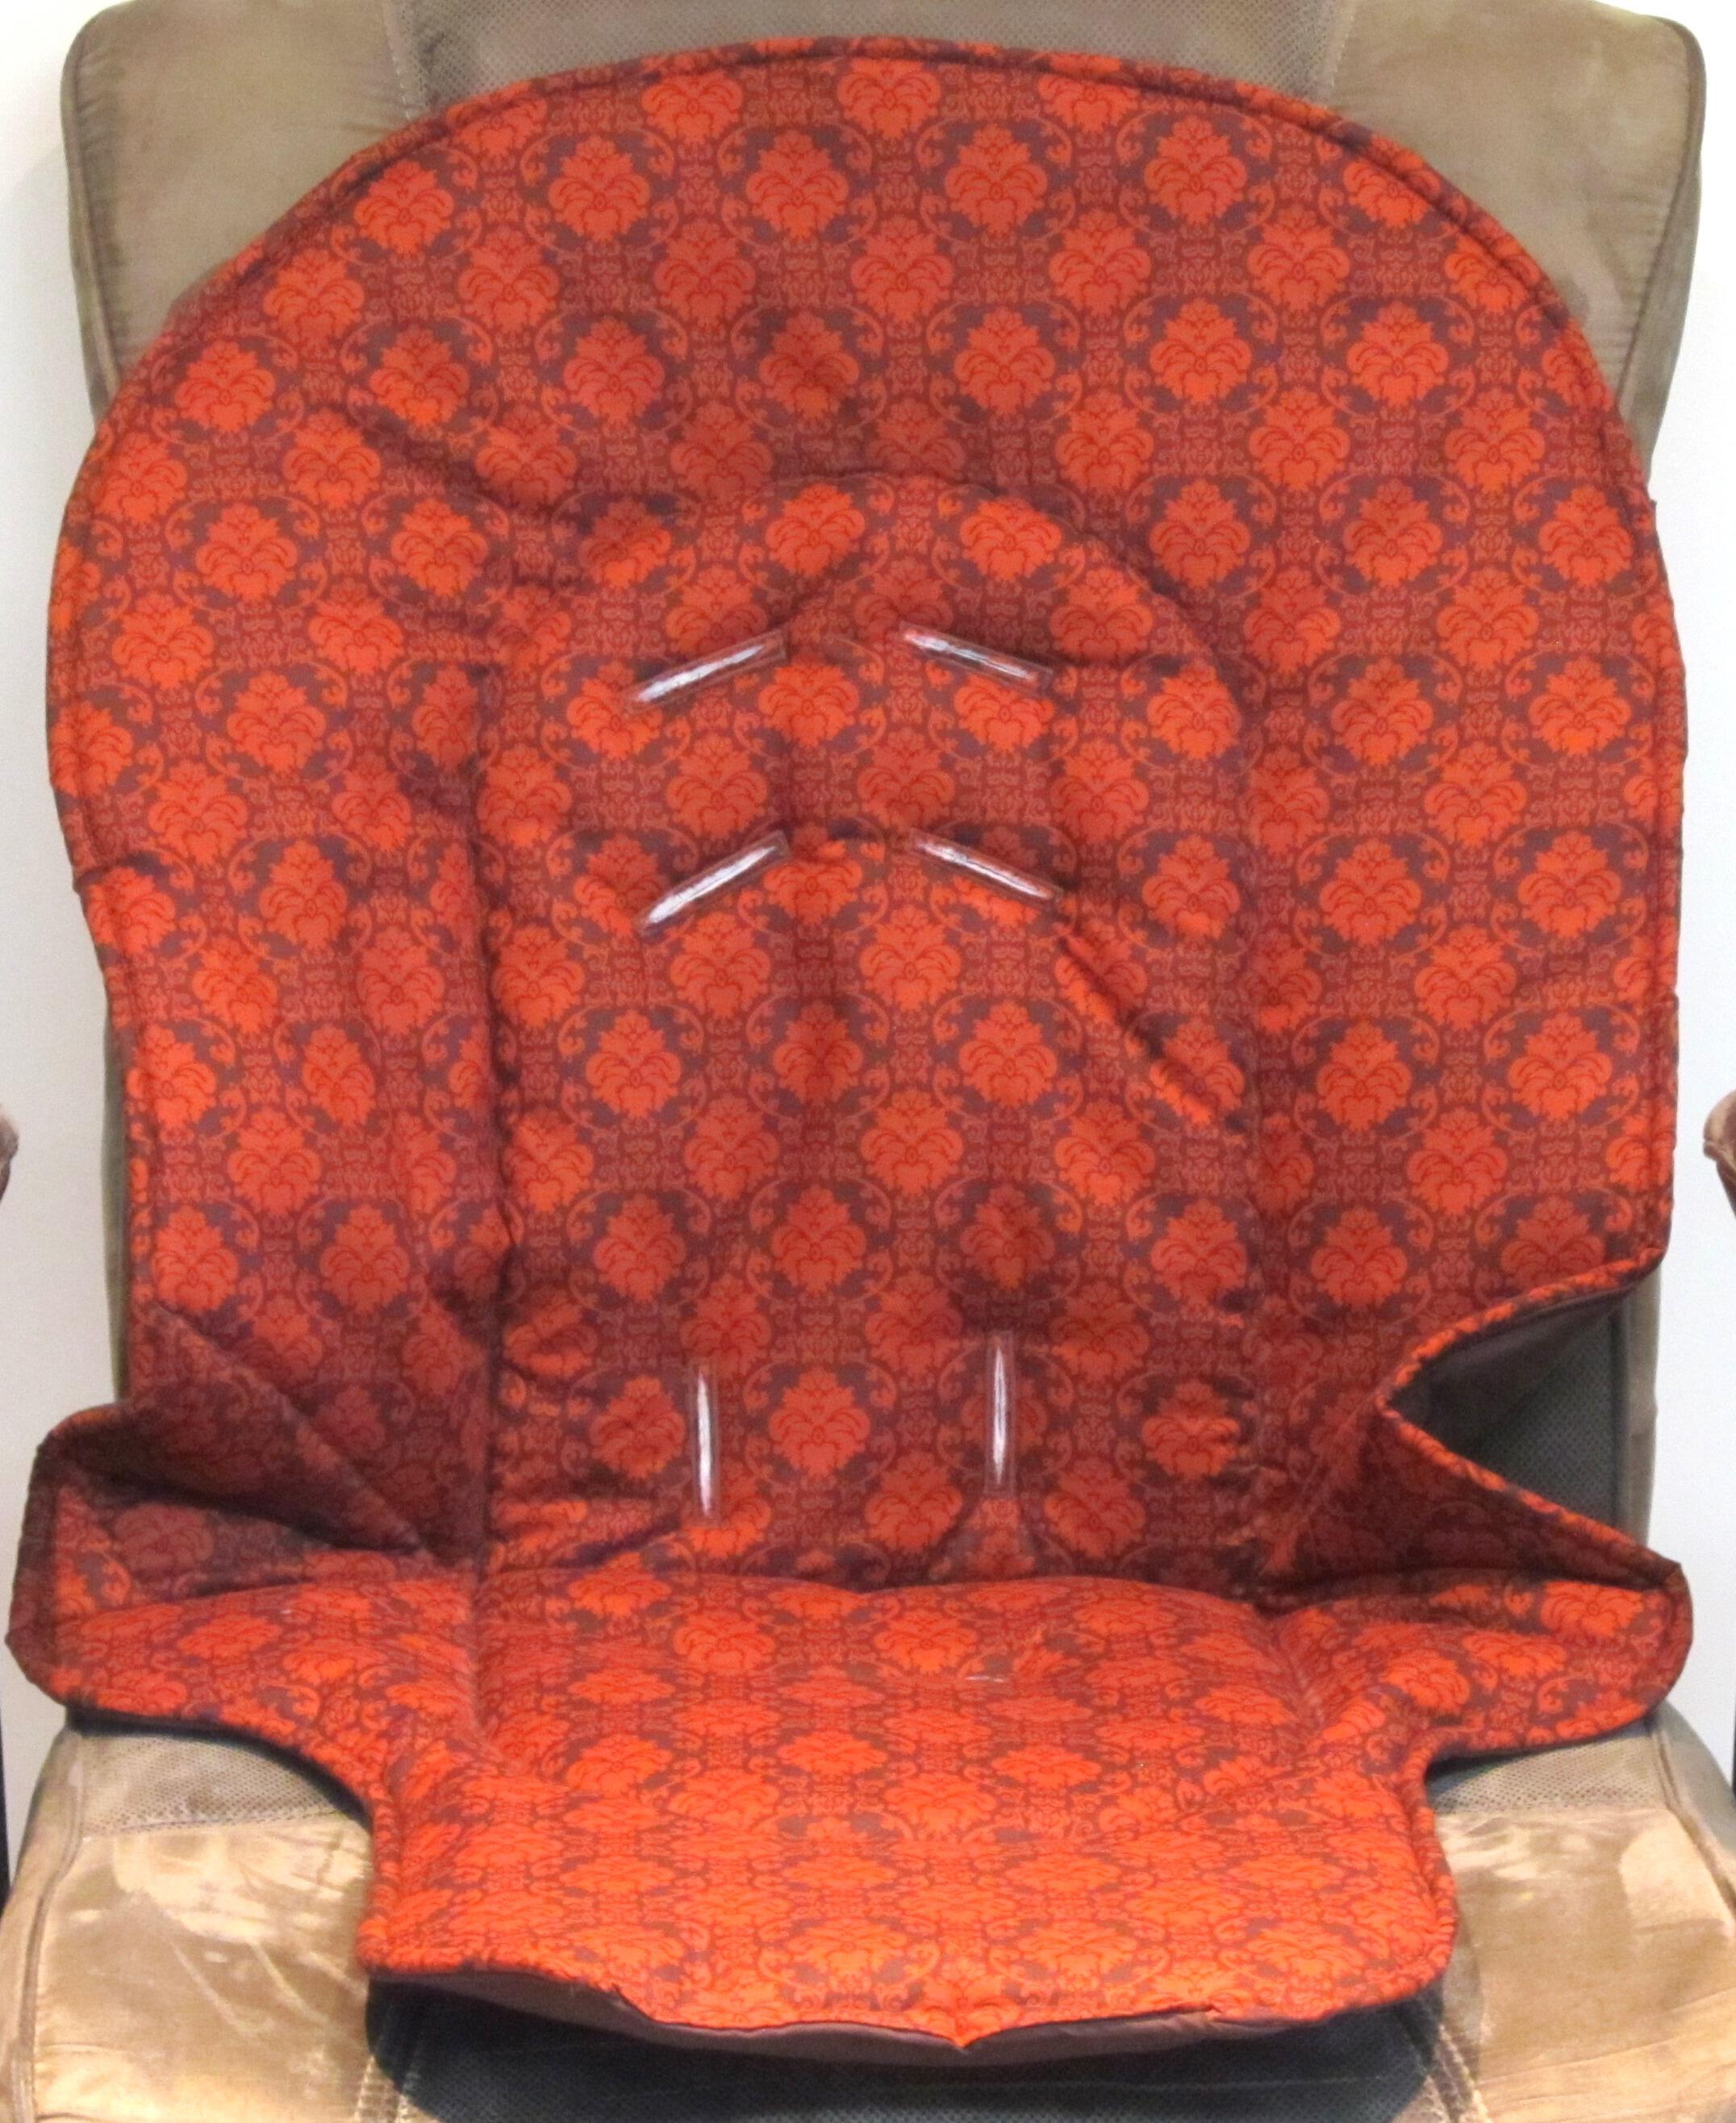 highchair cushion for Graco Duodiner older model or Blossom, replacement pad, deep rust on dark chocolate damask